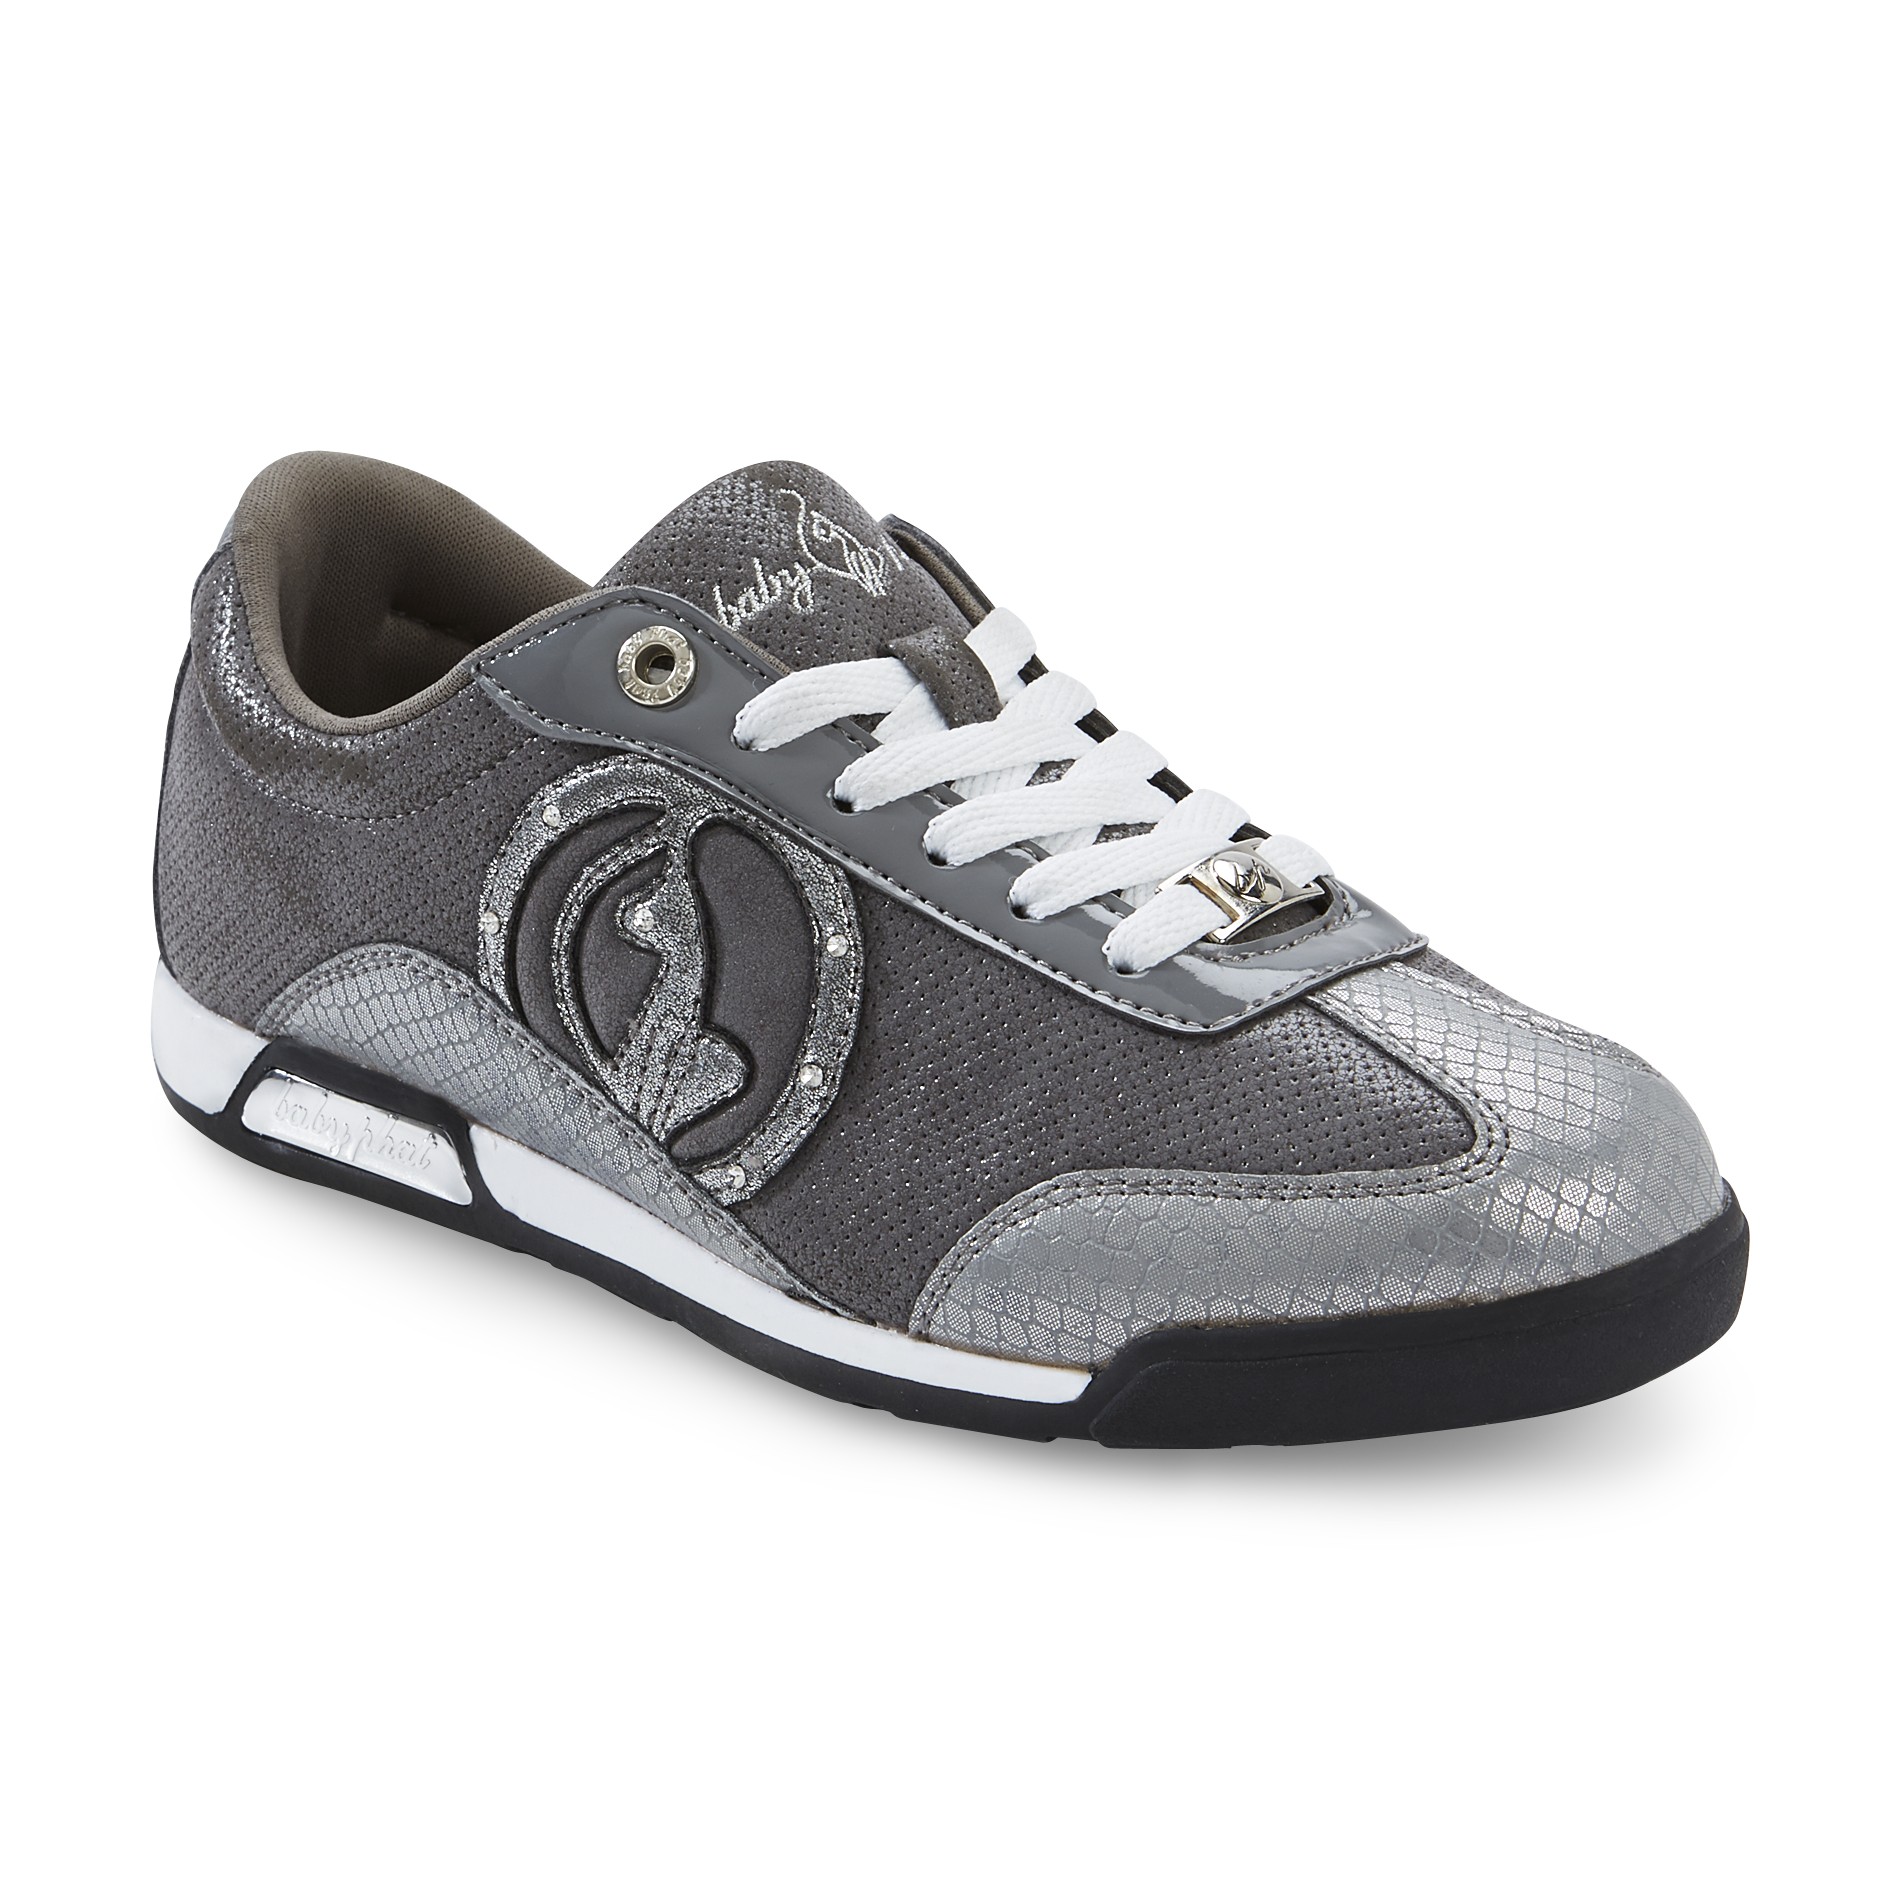 Baby Phat Women's Orla Charcoal/Silver Athletic Shoe